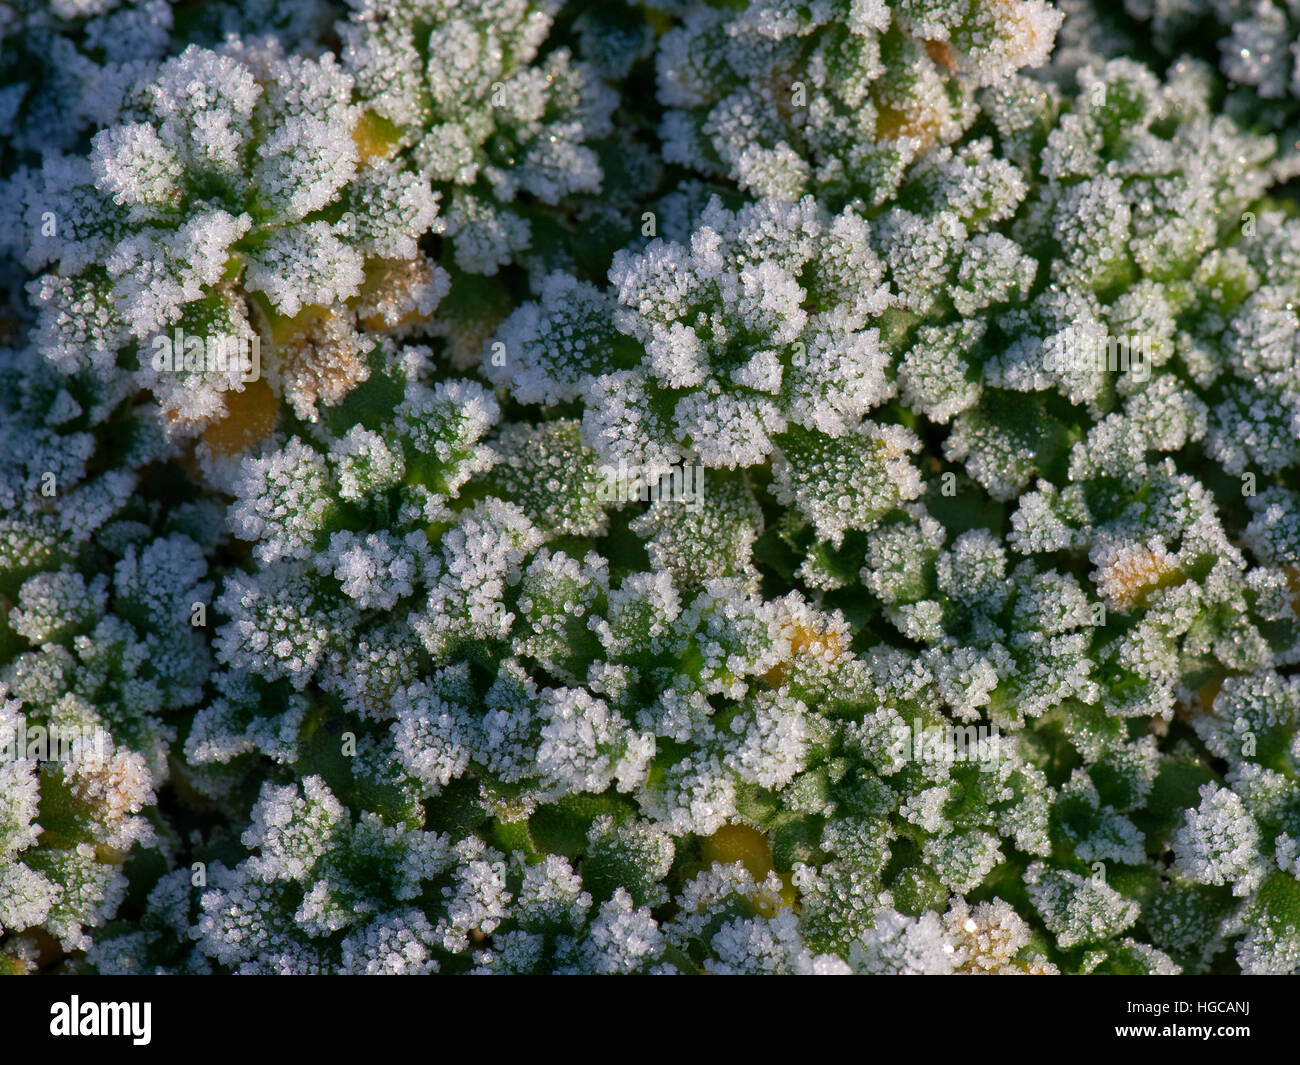 Hard frost on aubrietia, Aubreta,  leaves  on a cold winter morning in December Stock Photo